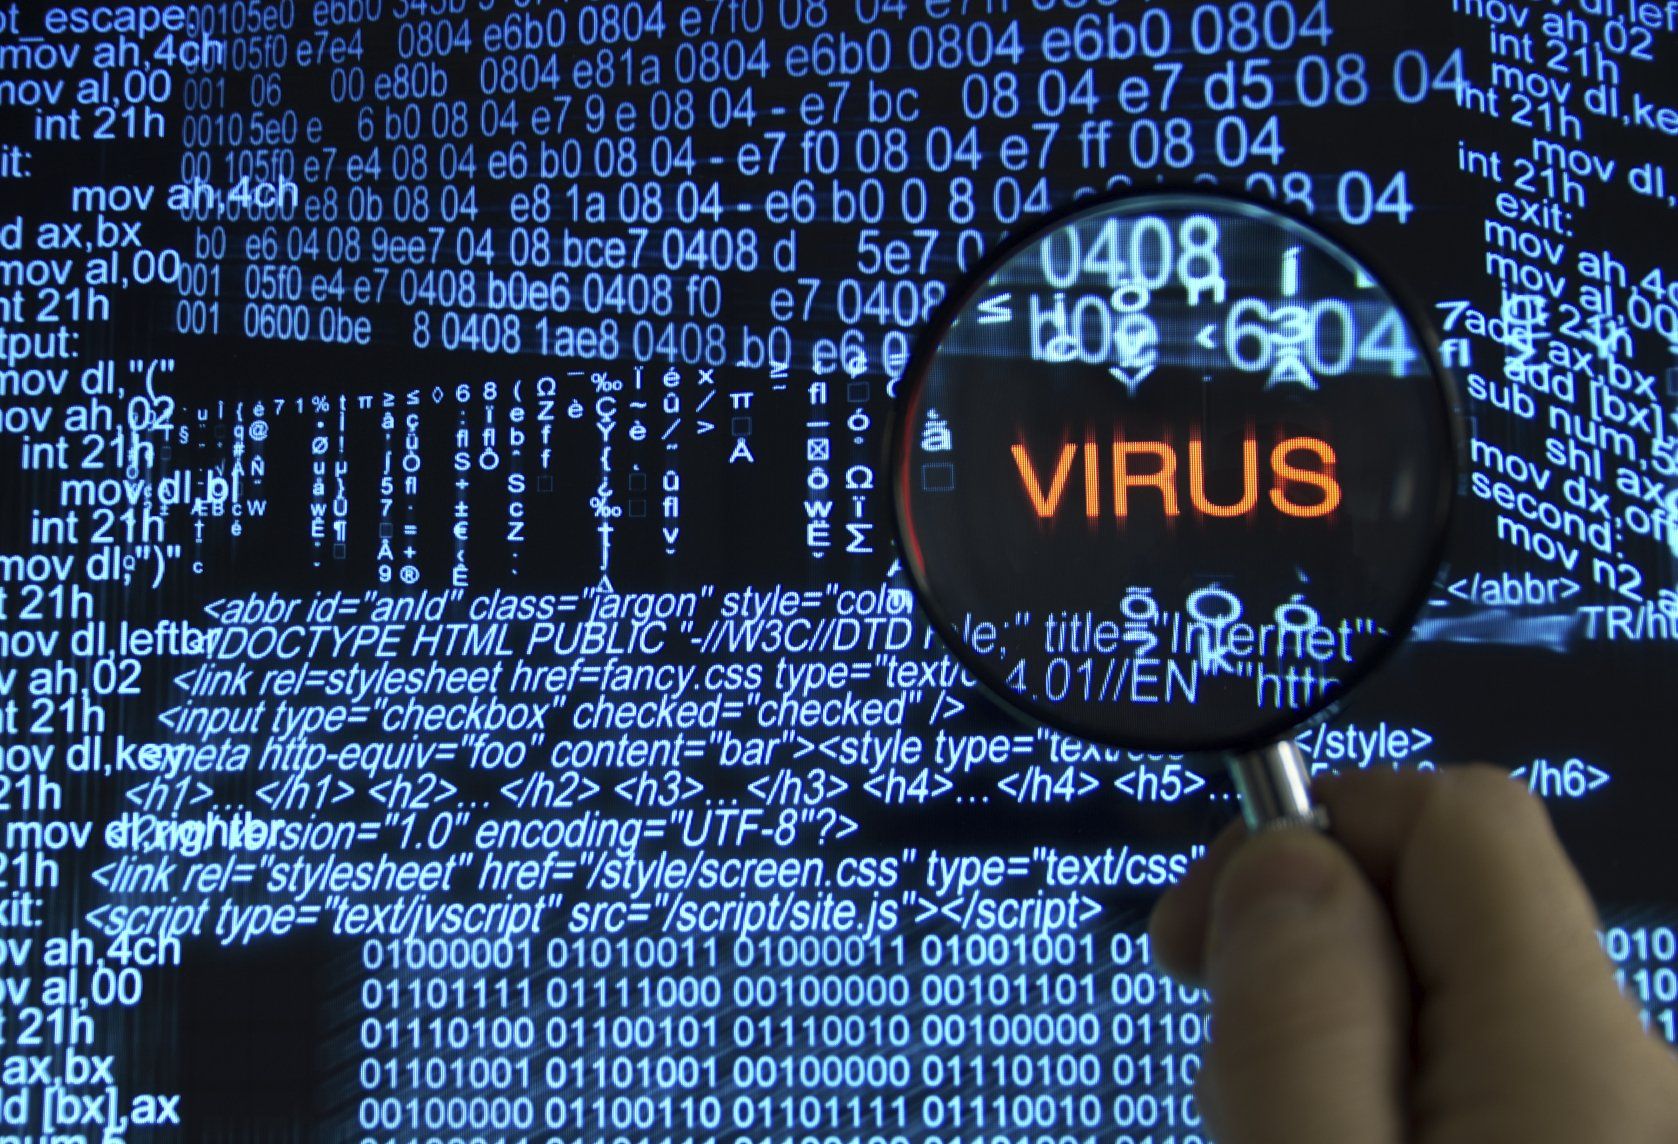 Protecting your devices from viruses and malware